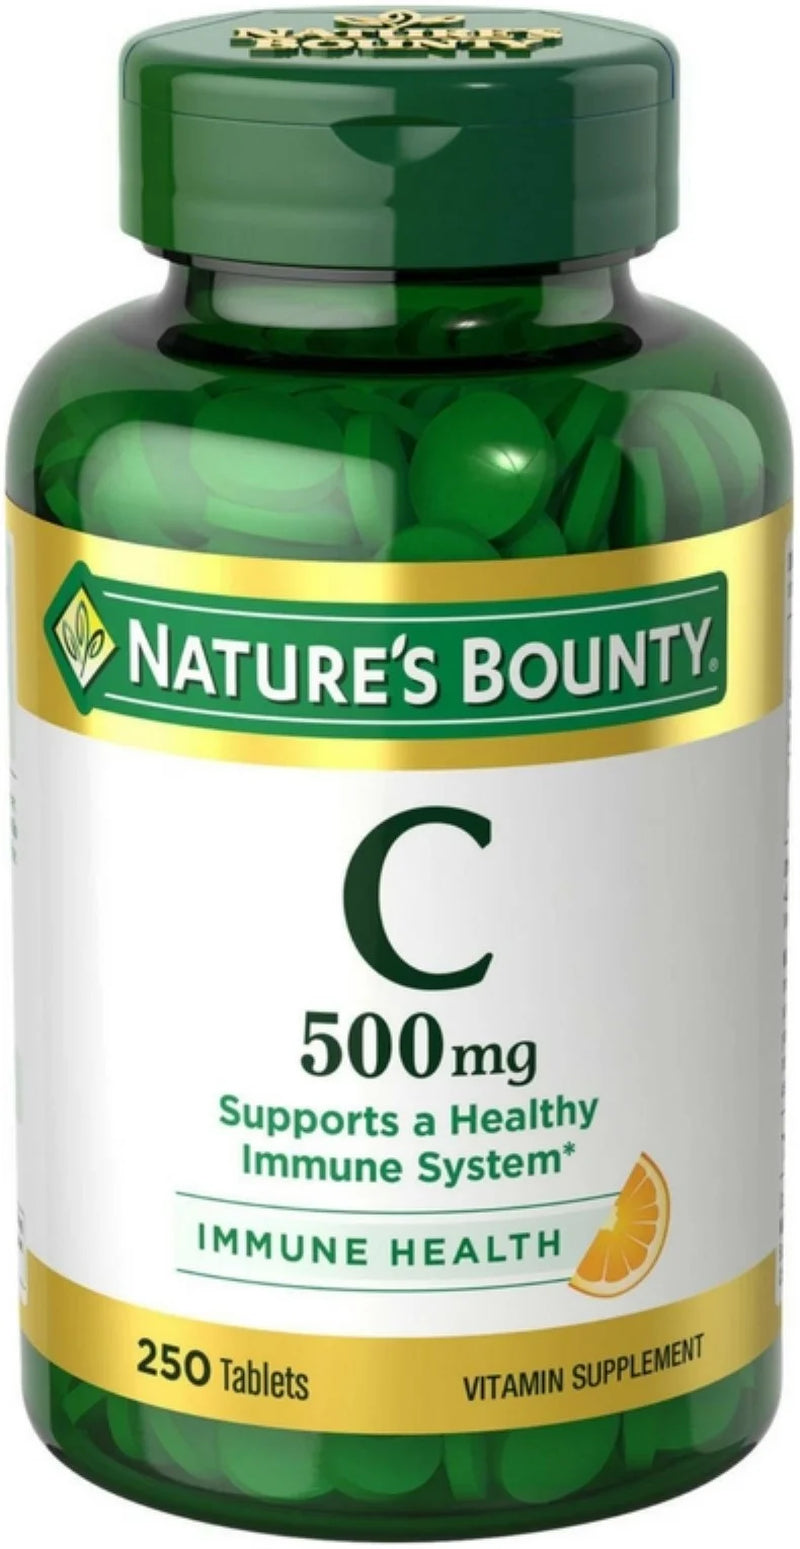 Nature'S Bounty Vitamin C 500 Mg, 250 Tablets (Pack of 2)